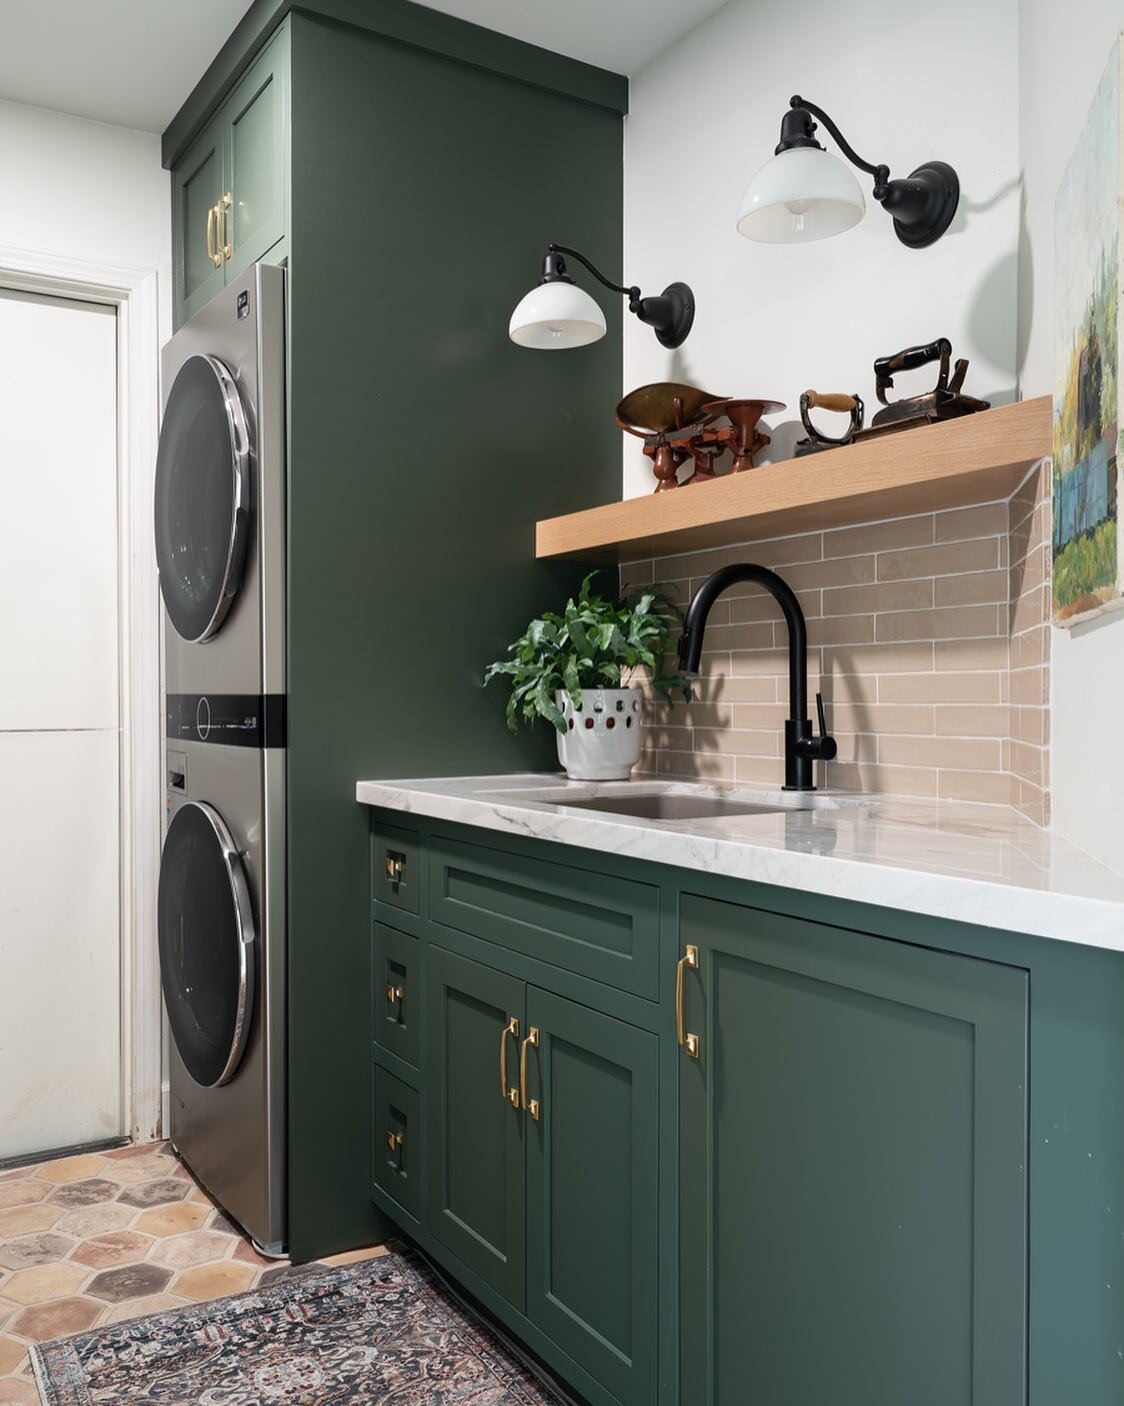 Green Cabinets in a Laundry Room Remodel check all the boxes! Soothing but fresh color in a workspace is so important. Make sense changes included relocating a heater to expand the area allowing more cabinets for storage and new drop zone. Check out 